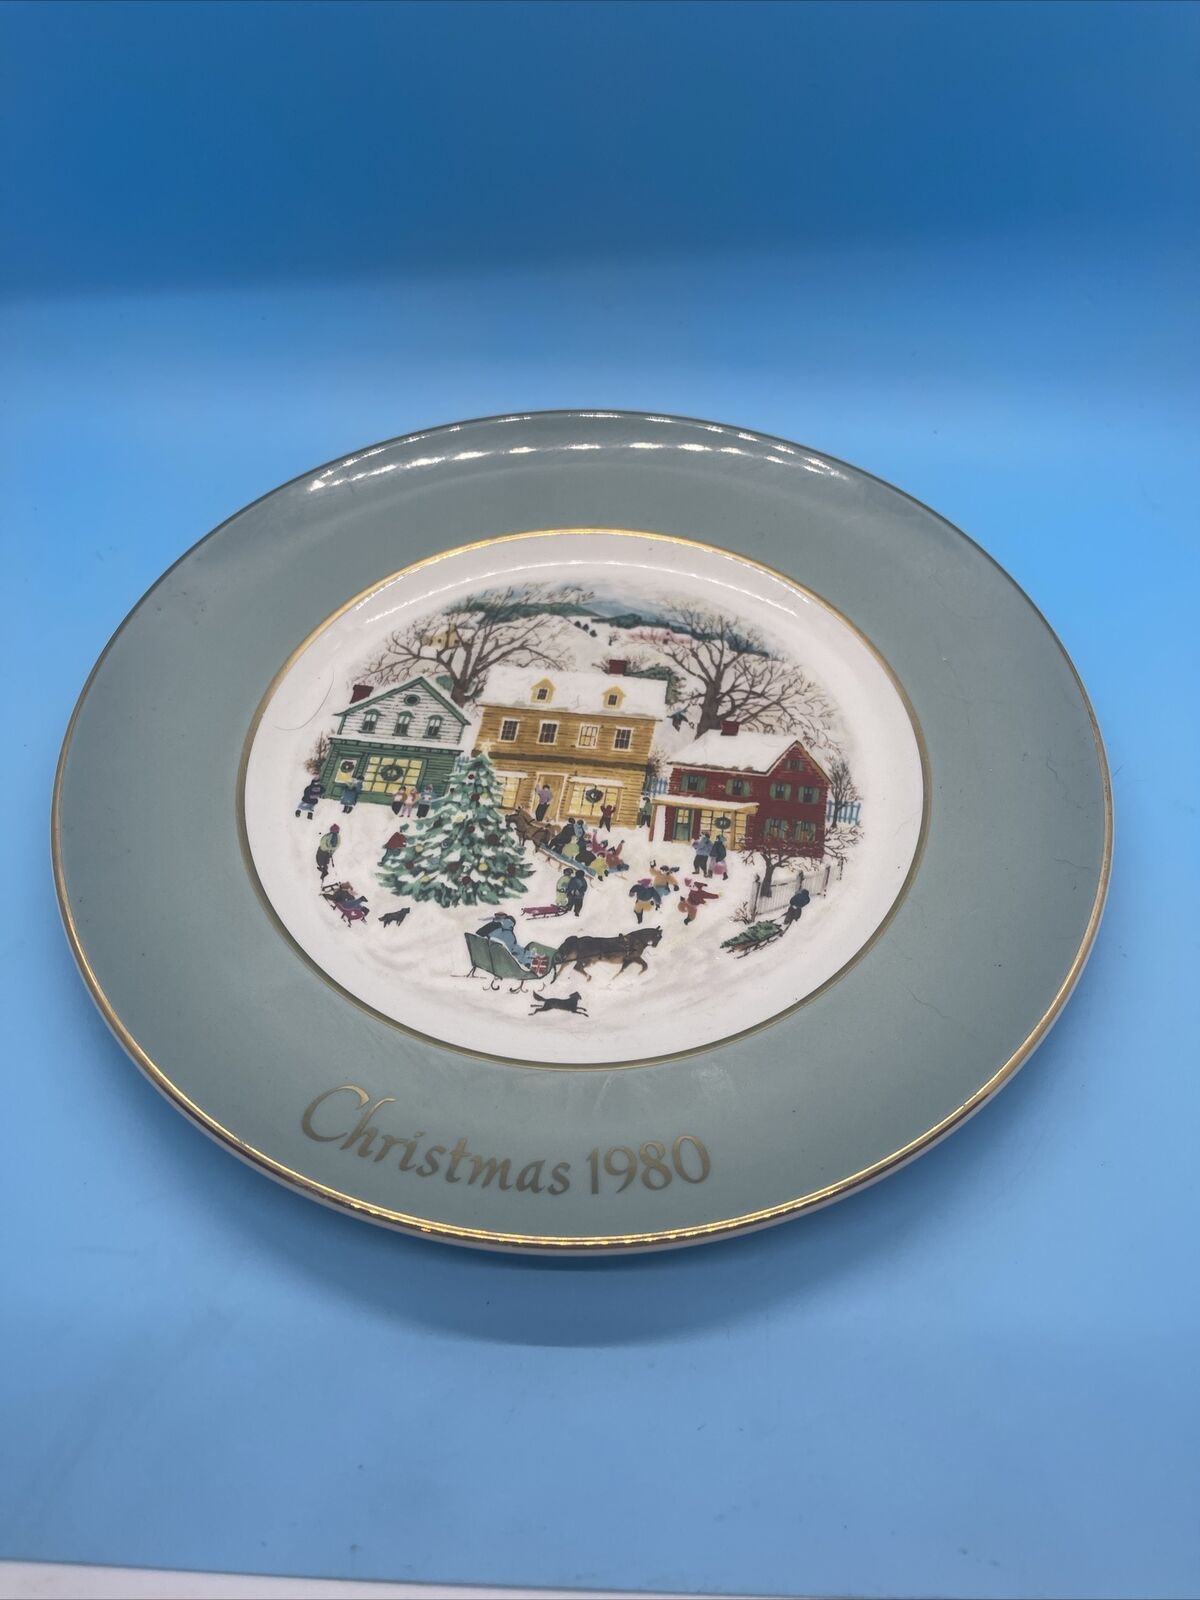 Avon Christmas Collectible Plate Country Christmas Enoch Wedgwood England 1980 